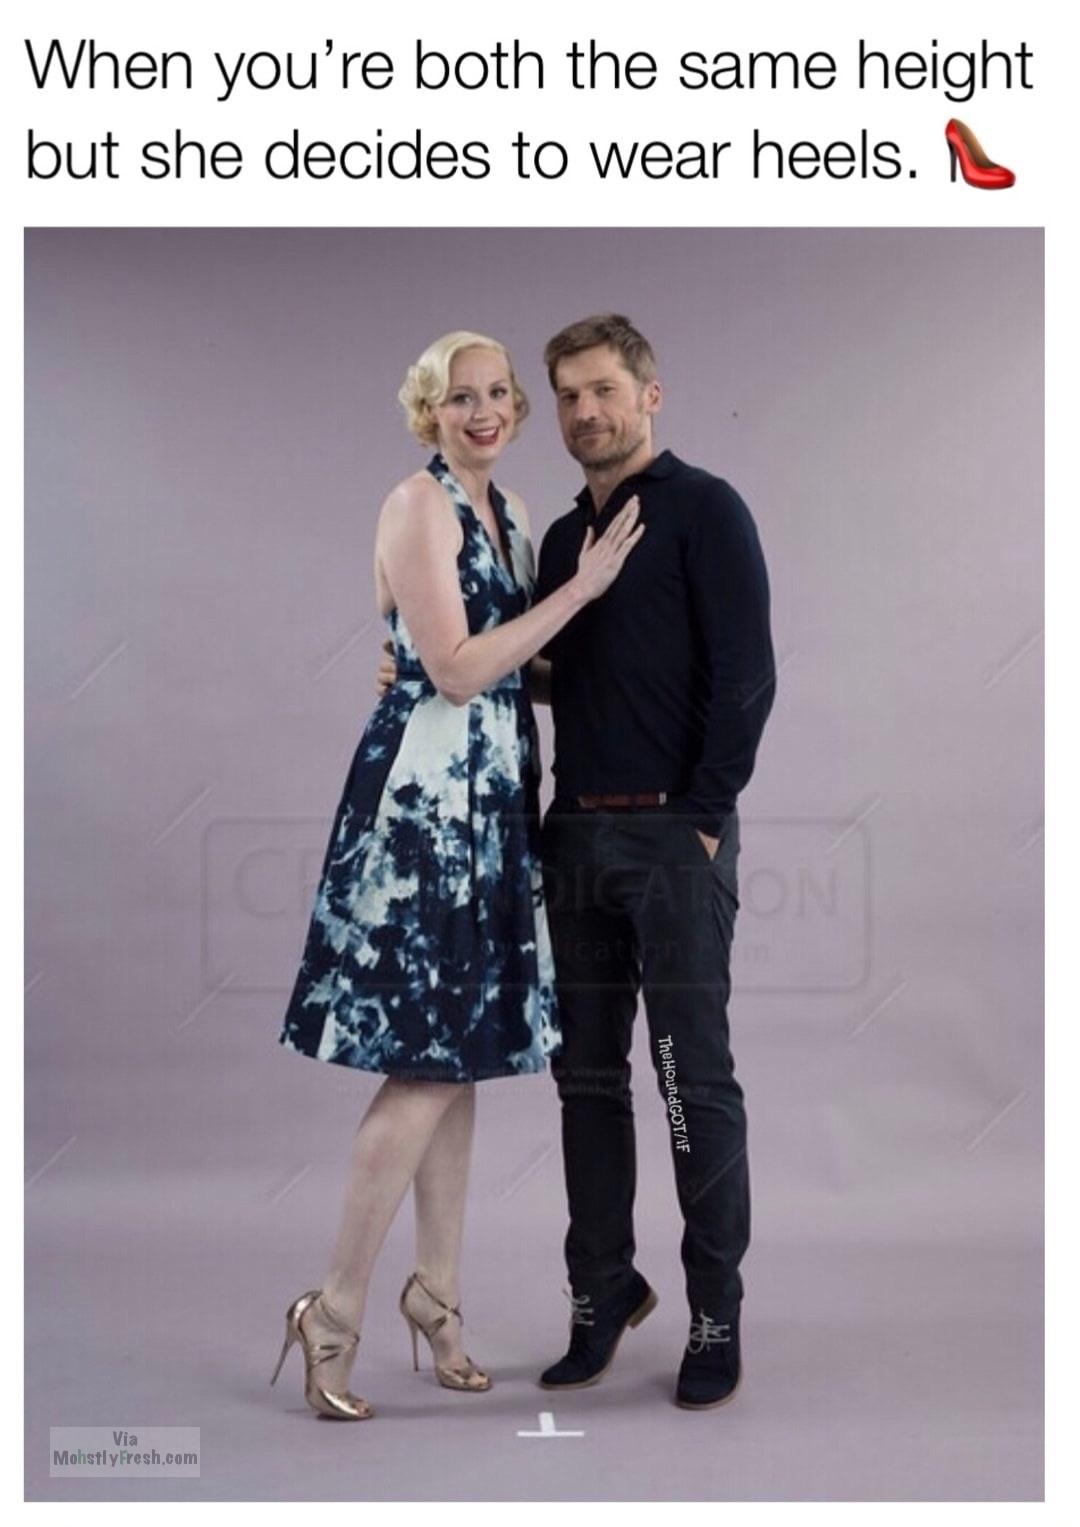 jaime lannister brienne of tarth meme - When you're both the same height but she decides to wear heels. Il The HoundGOTIf Via Mohstly Fresh.com